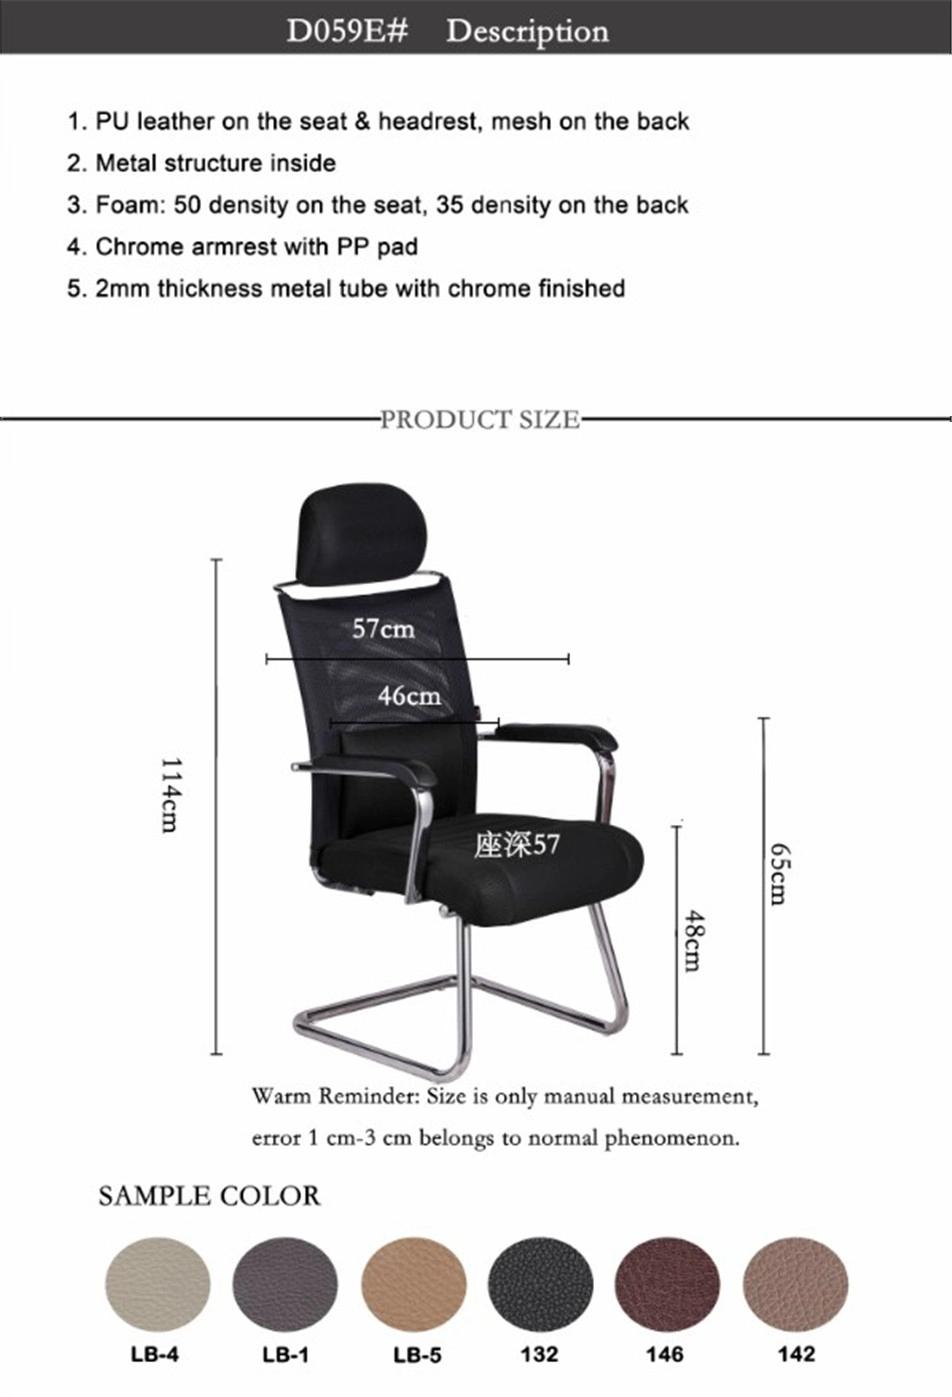 Trade Well High Back Cushion Fixed Office Drafting Chair with Arms Meeting Chair